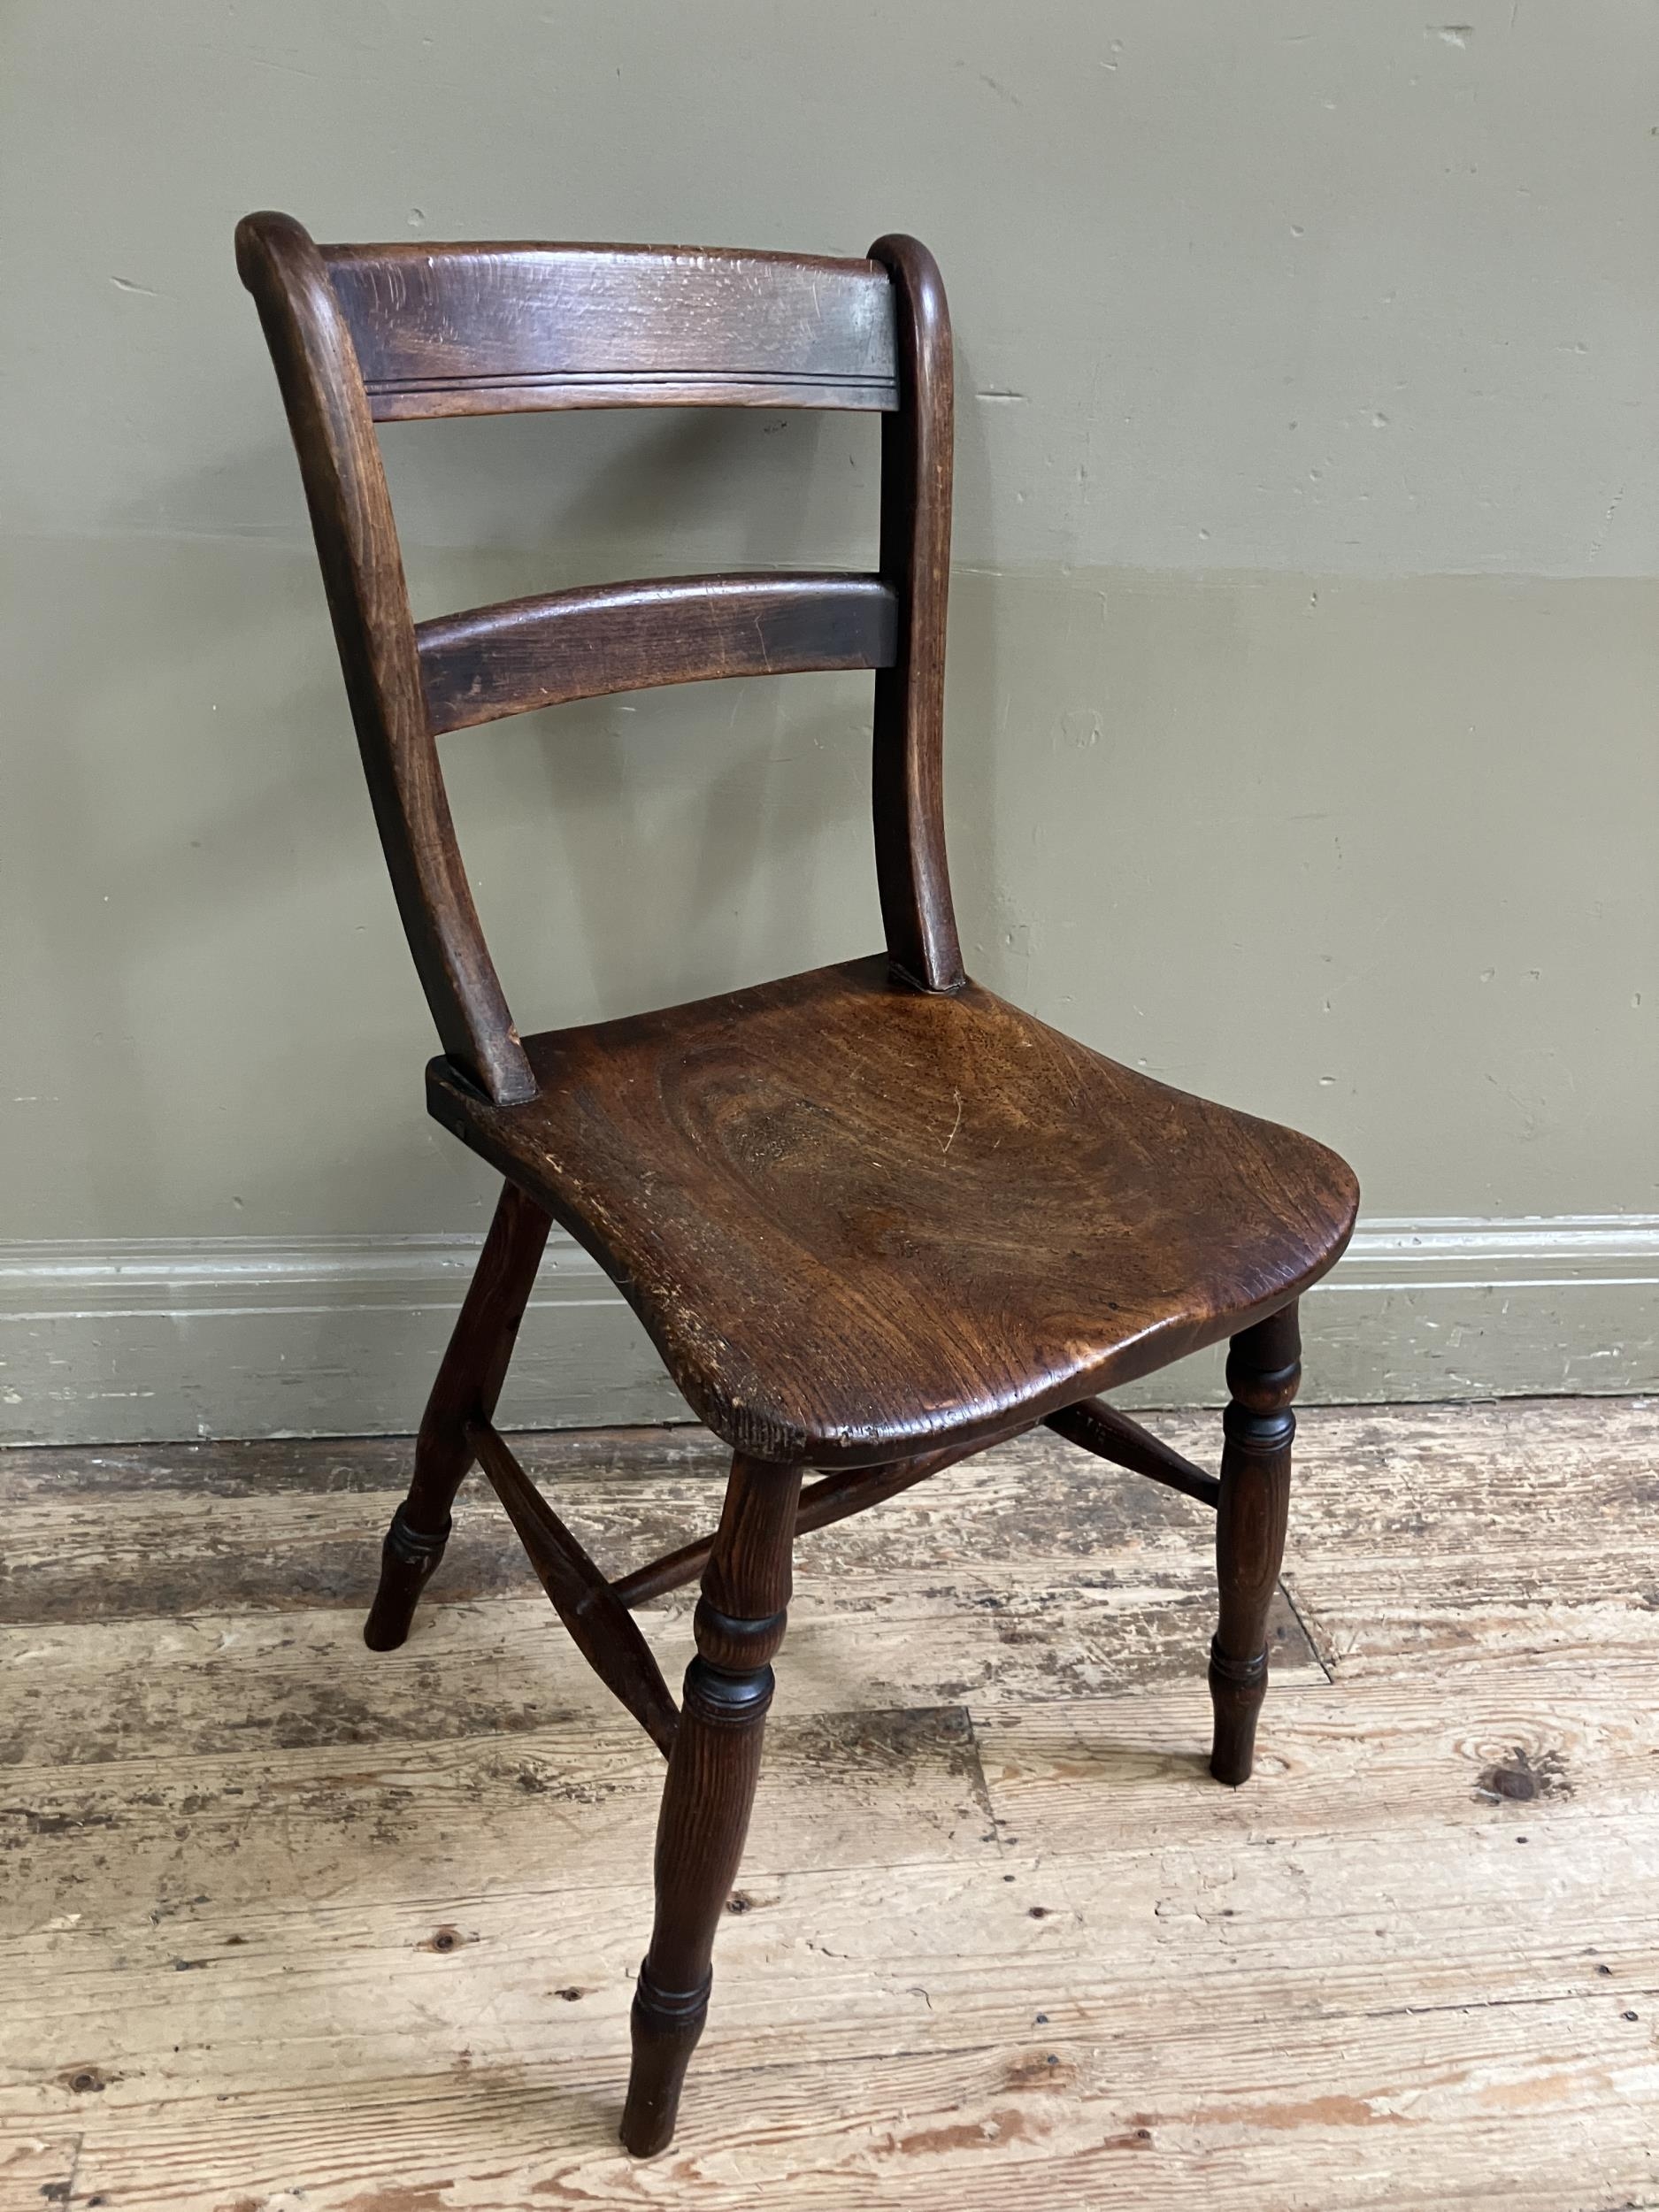 A late 19th/early 20th century fruitwood kitchen chair with bar back and tie rail, saddle shaped